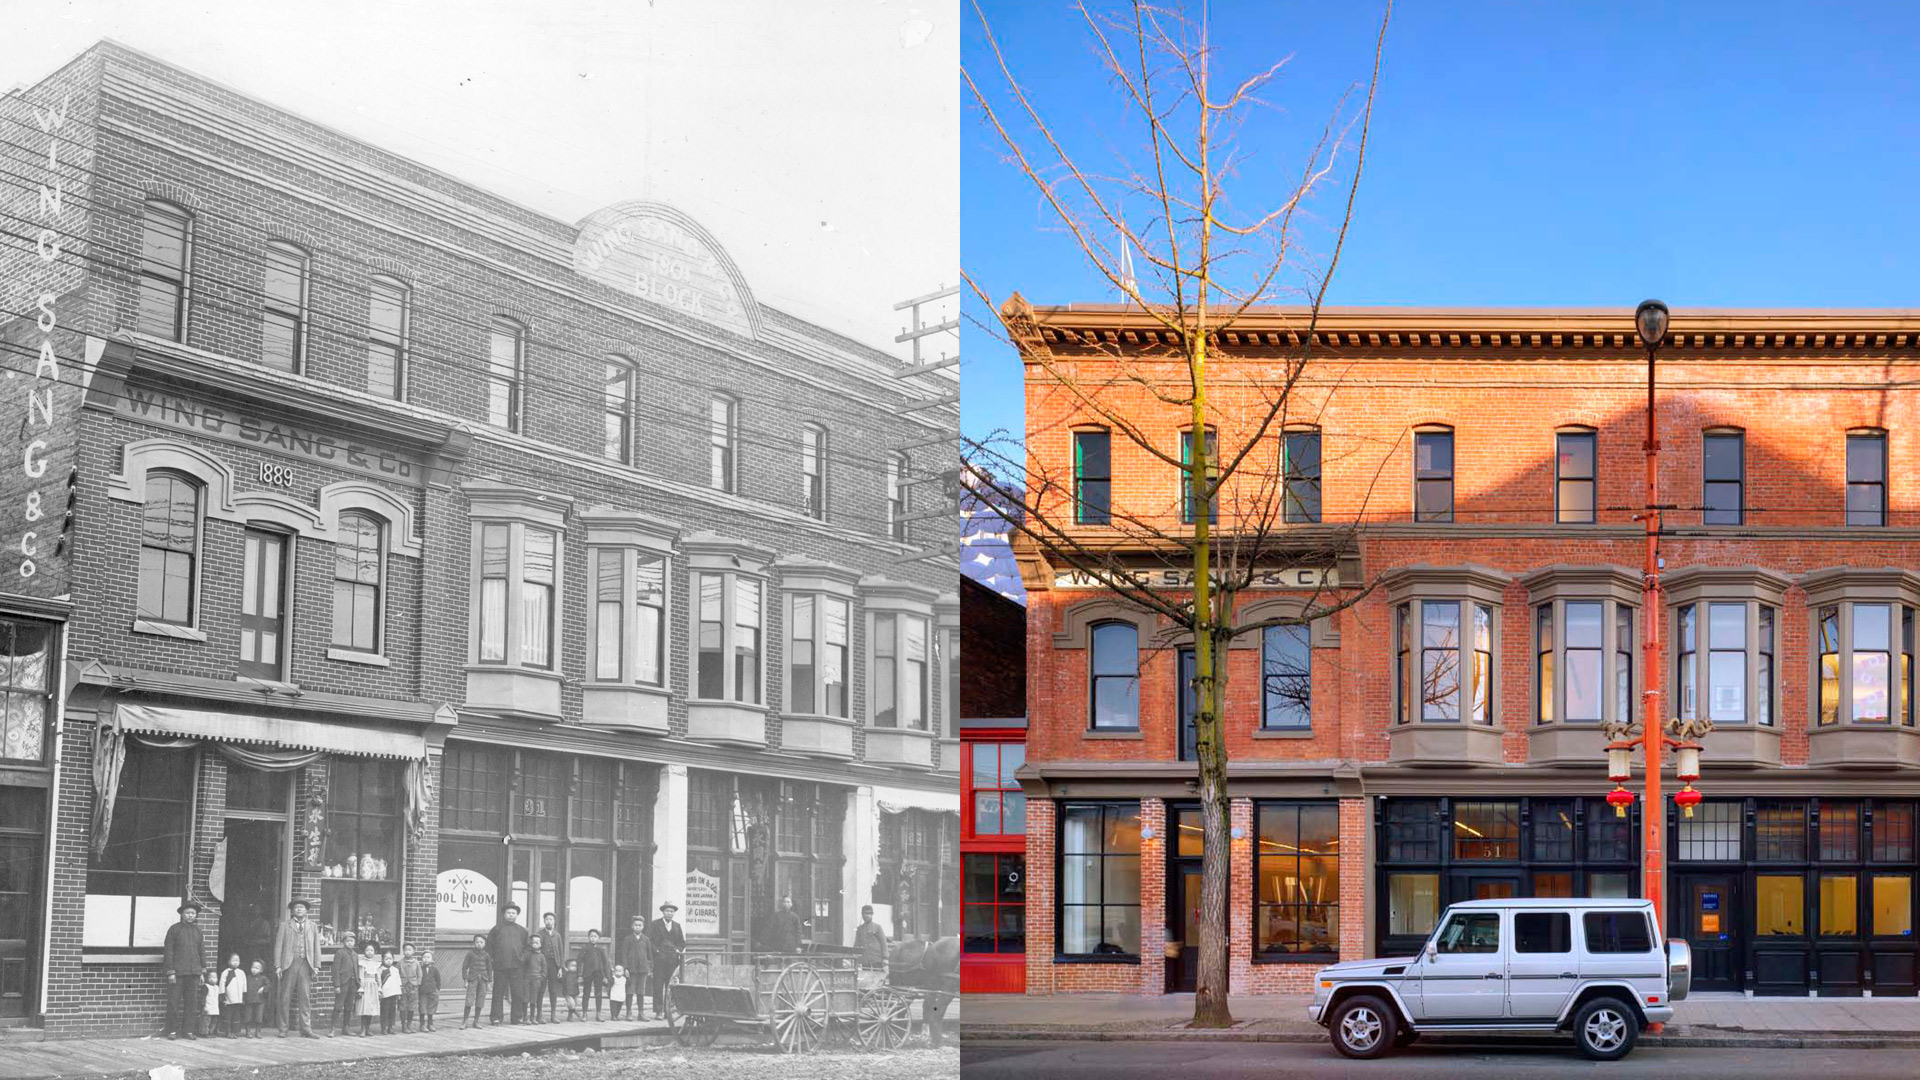 The before and after of an old three-storey building, one hundred years apart. The first is in black and white and has a large Chinese family standing in front of it.